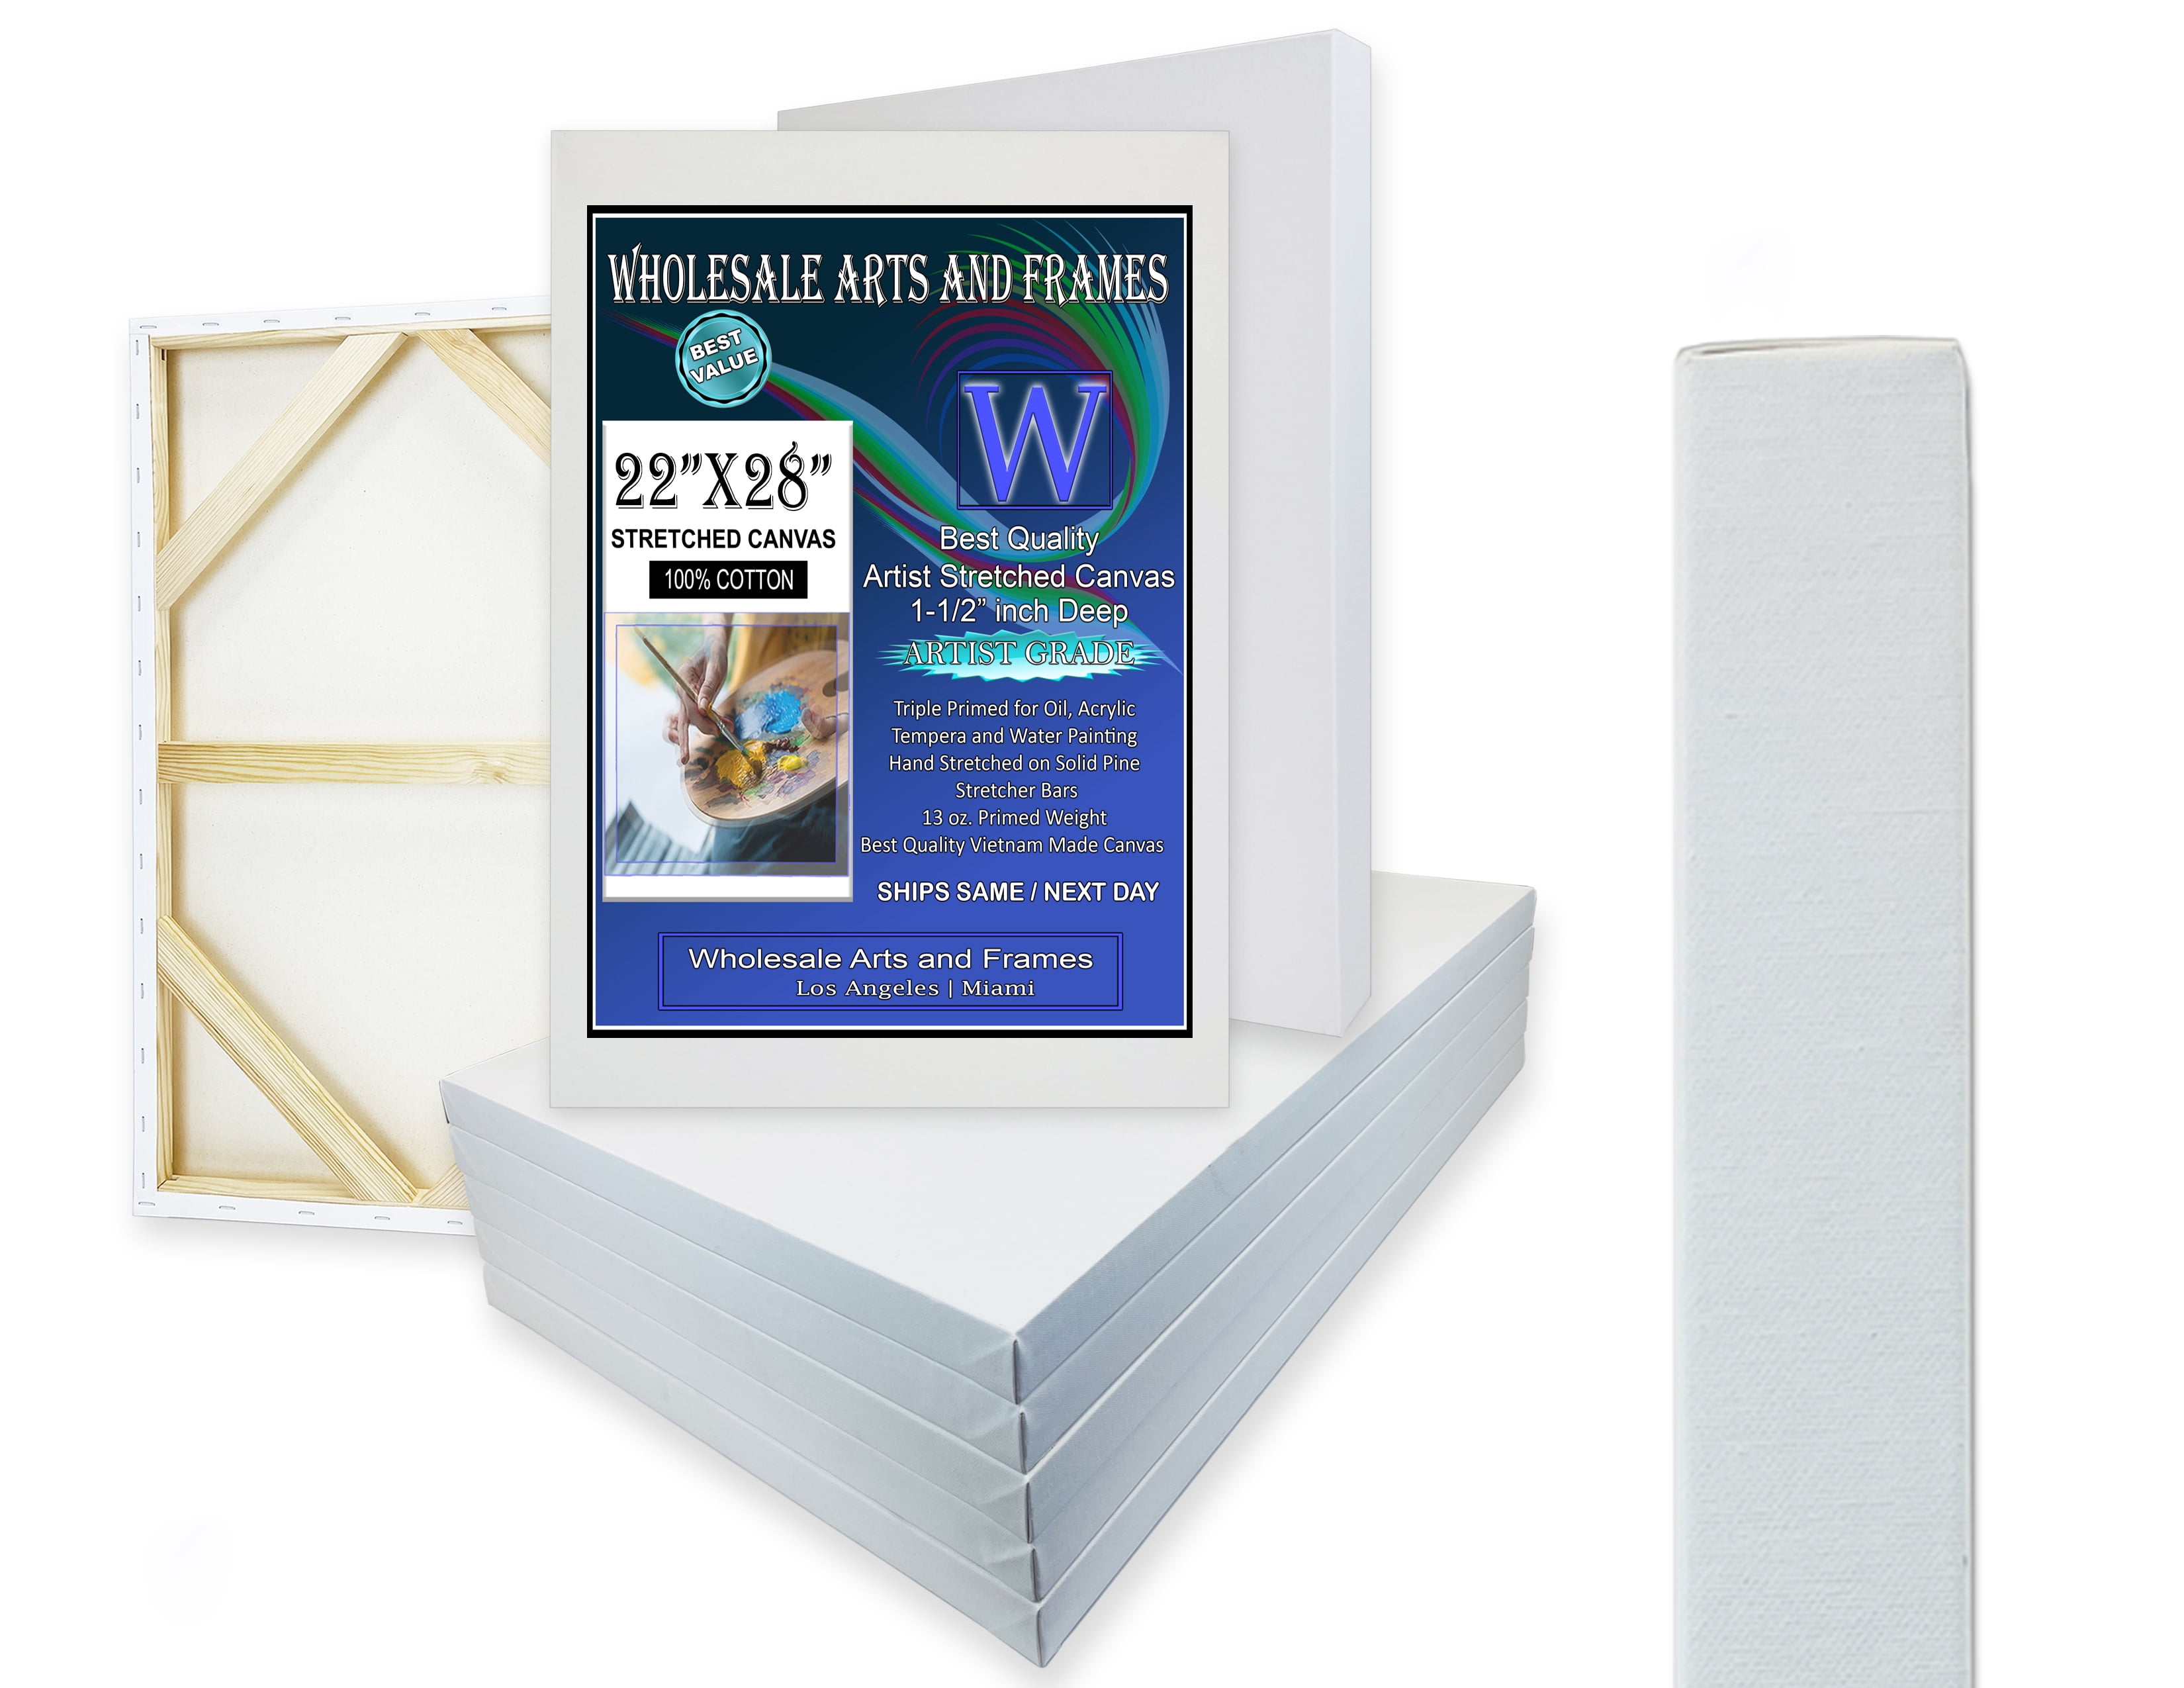 Artkey Canvases for Painting 8x10 inch 48-Pack, 10 oz Primed 100% Cotton White Blank Flat Canvas Boards, Art Paint Canvas Panels for Acrylic Oil